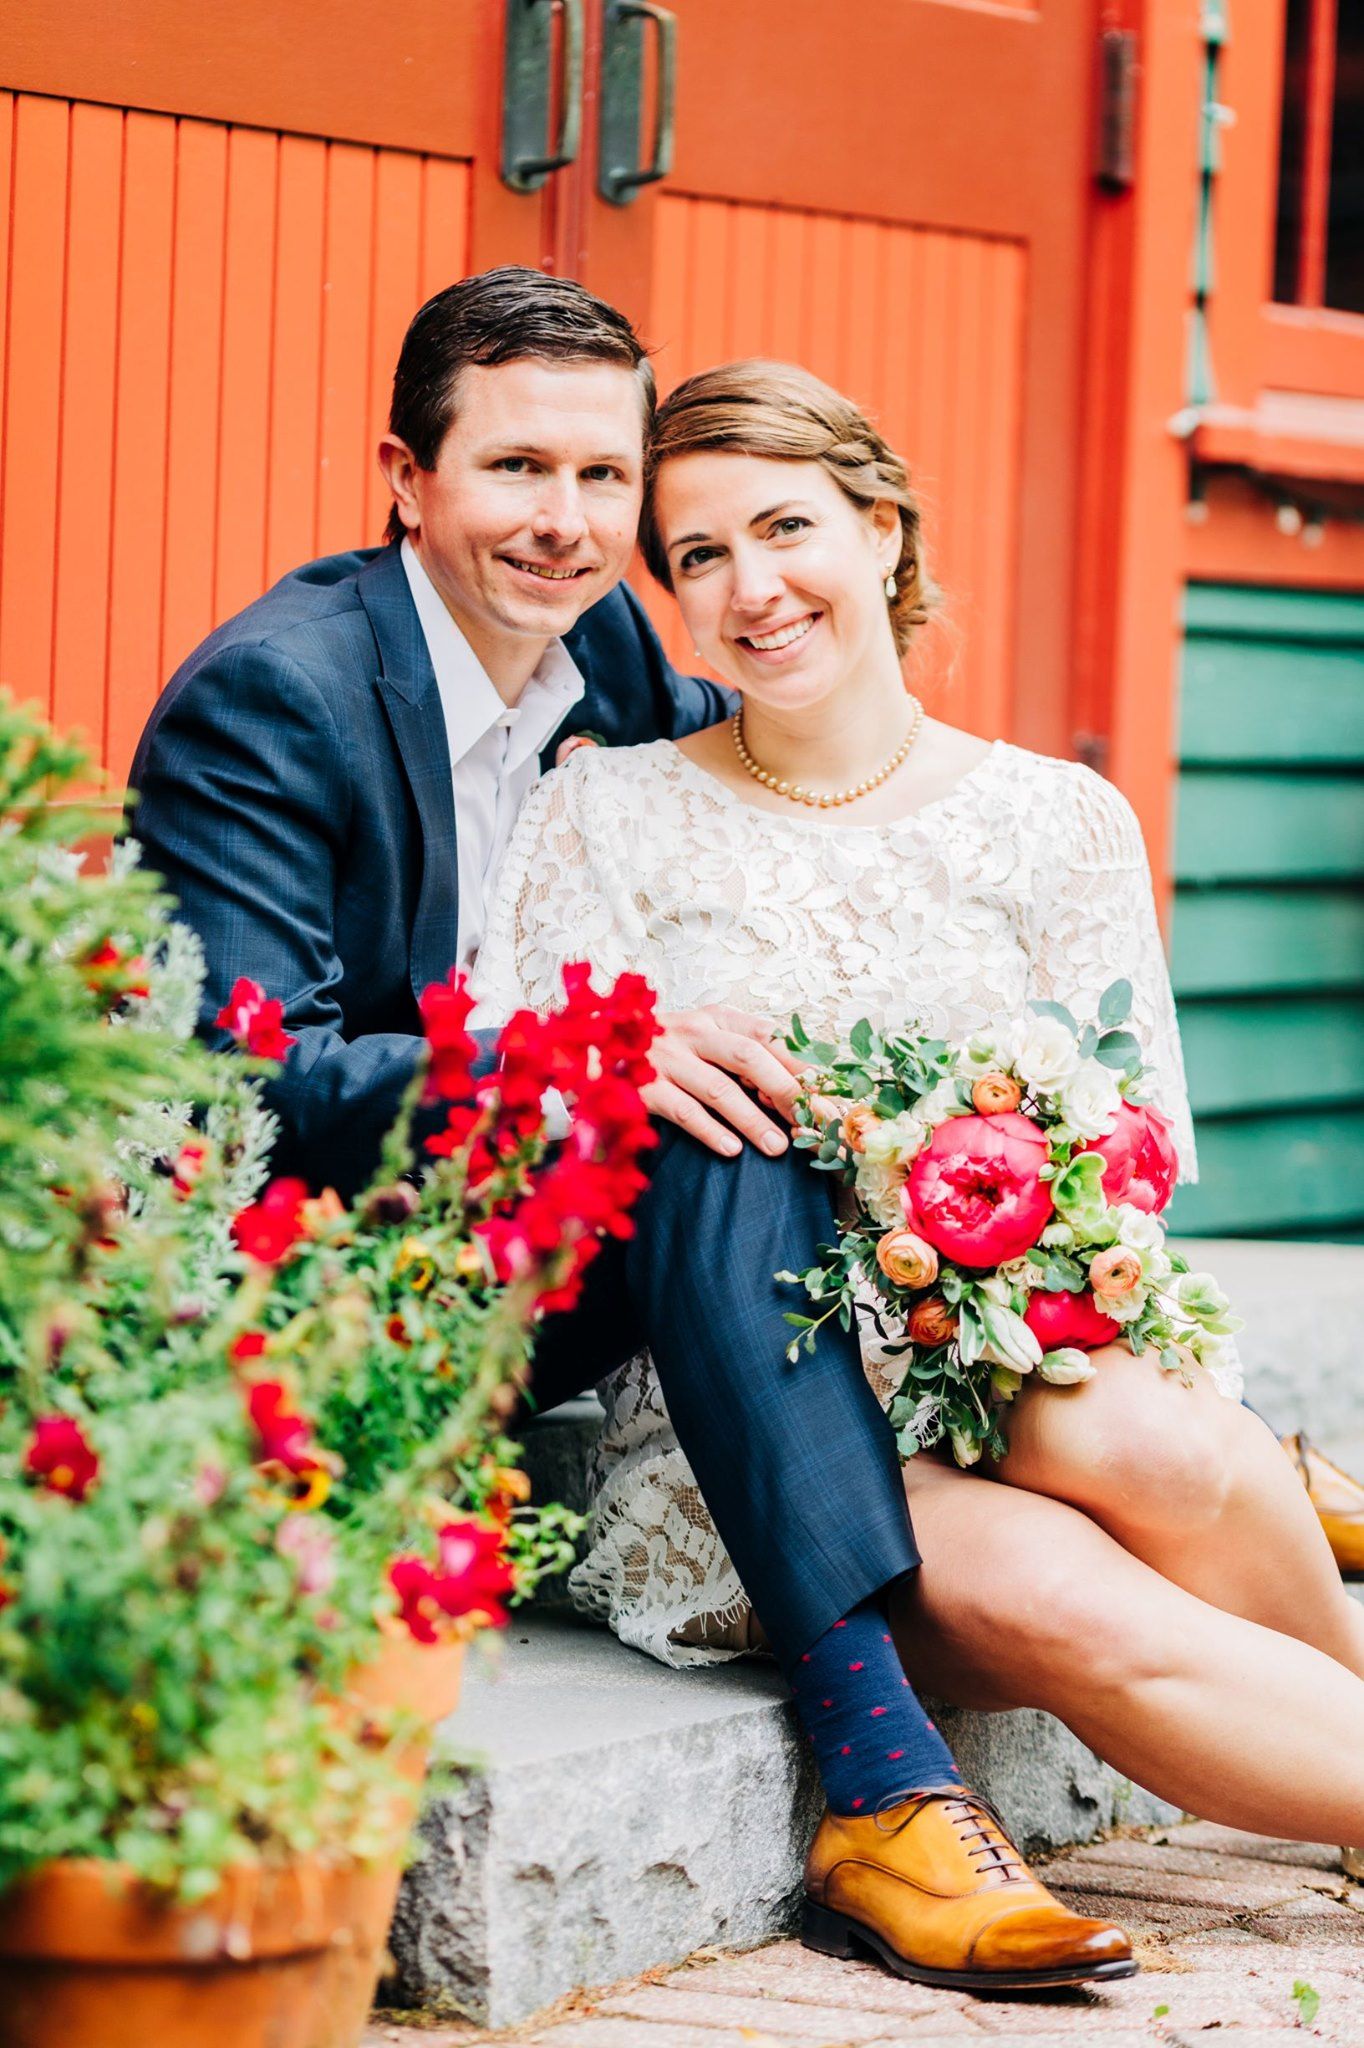 Image for post: Beautiful Small Spring 2020 Ceremony in the Trolley Barn Gardens